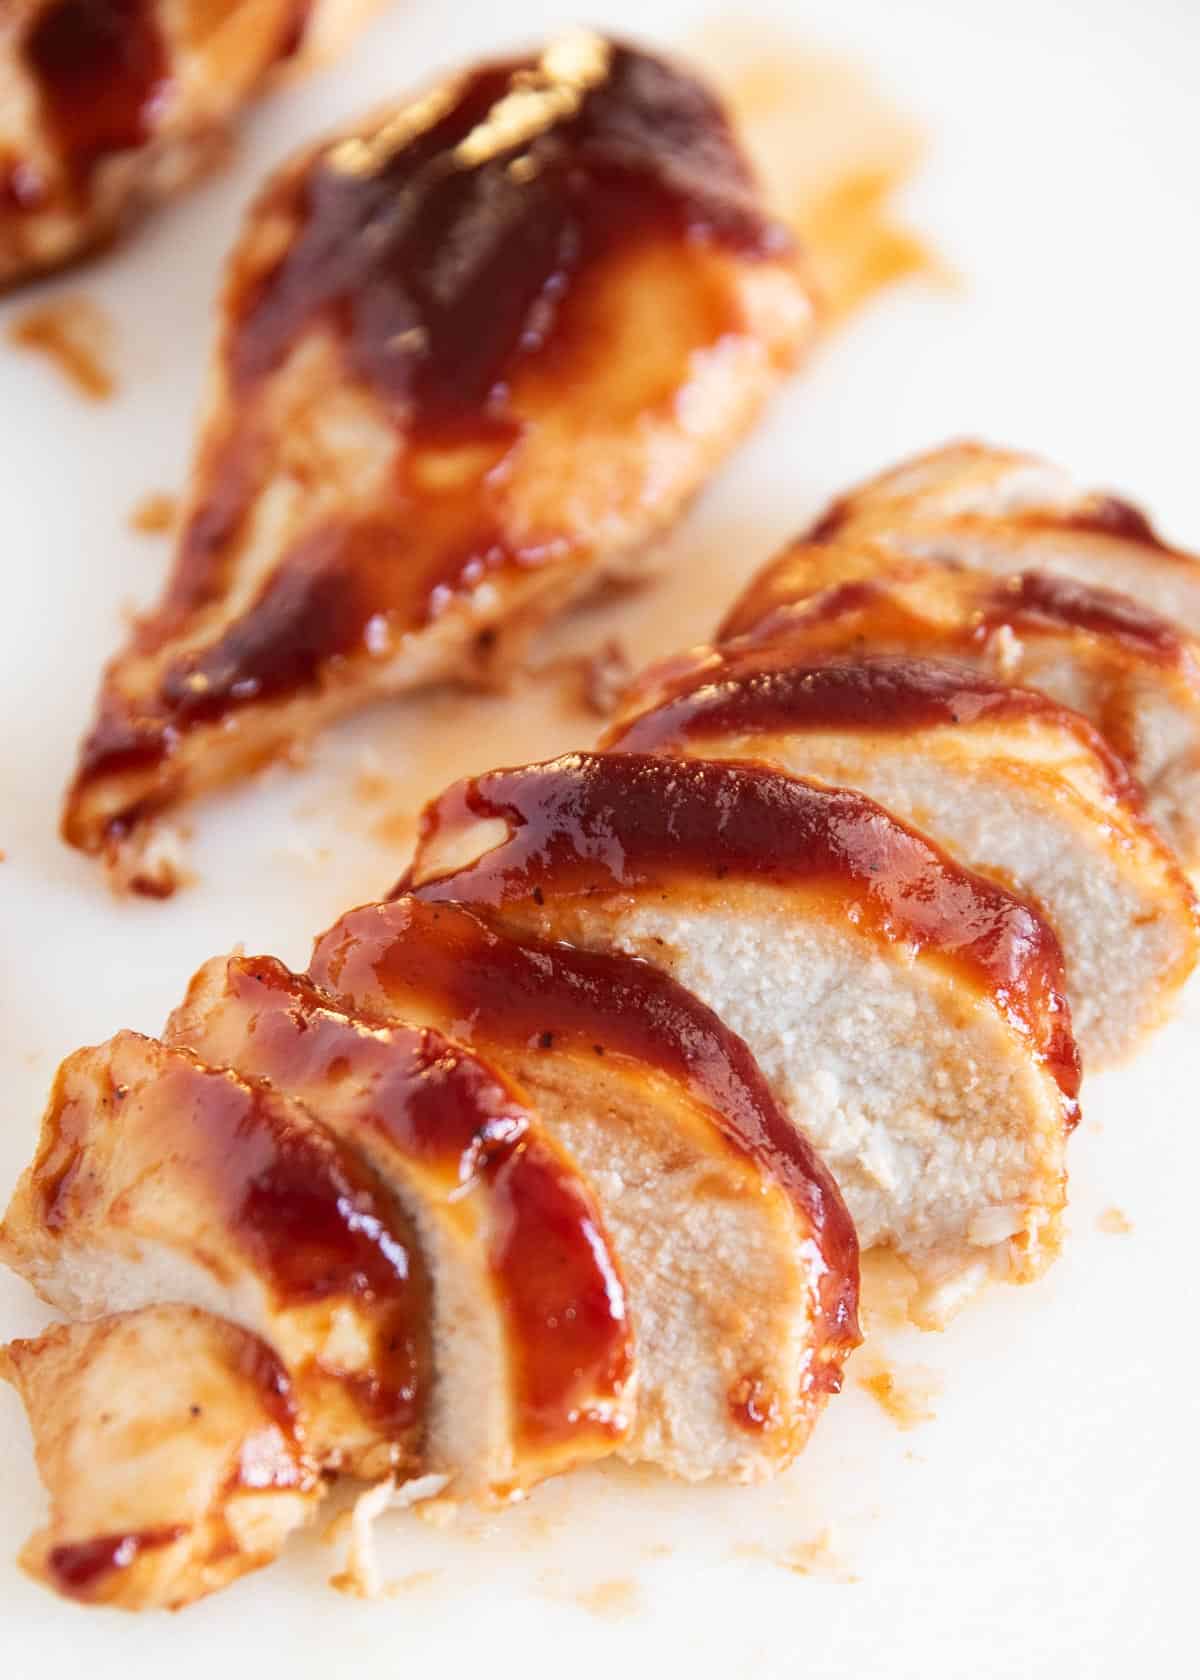 Baked bbq chicken slices close up.